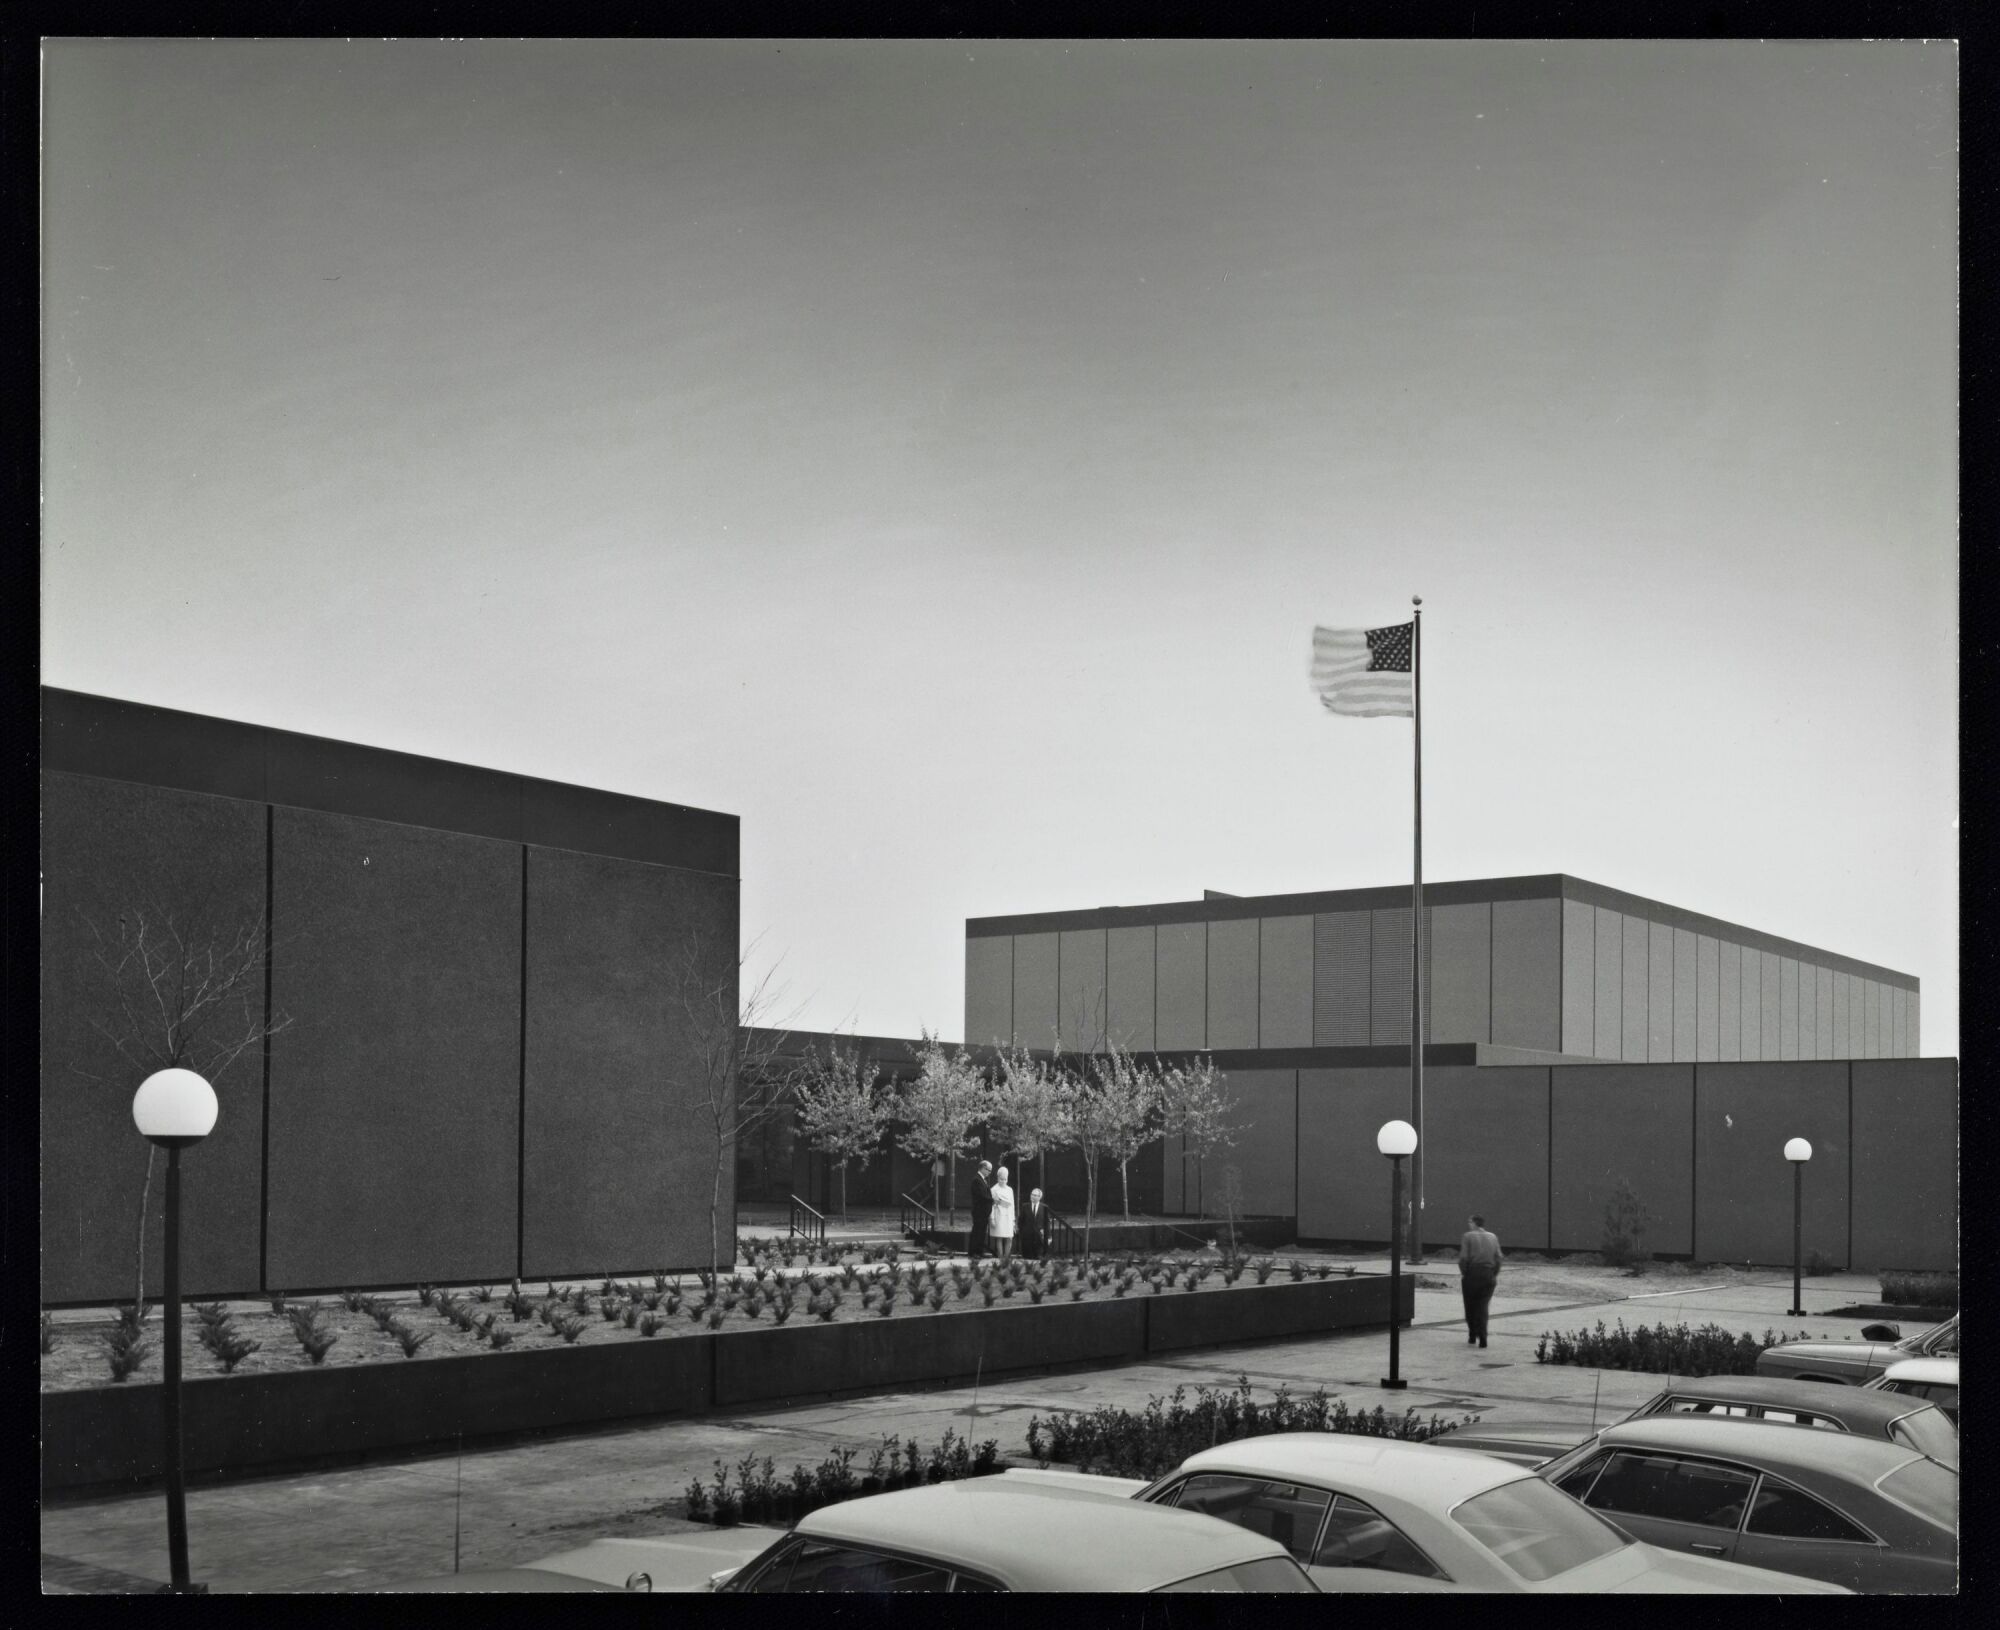 A vintage black and white image shows two blocky buildings separated by a breezeway, over which fly a U.S. flag